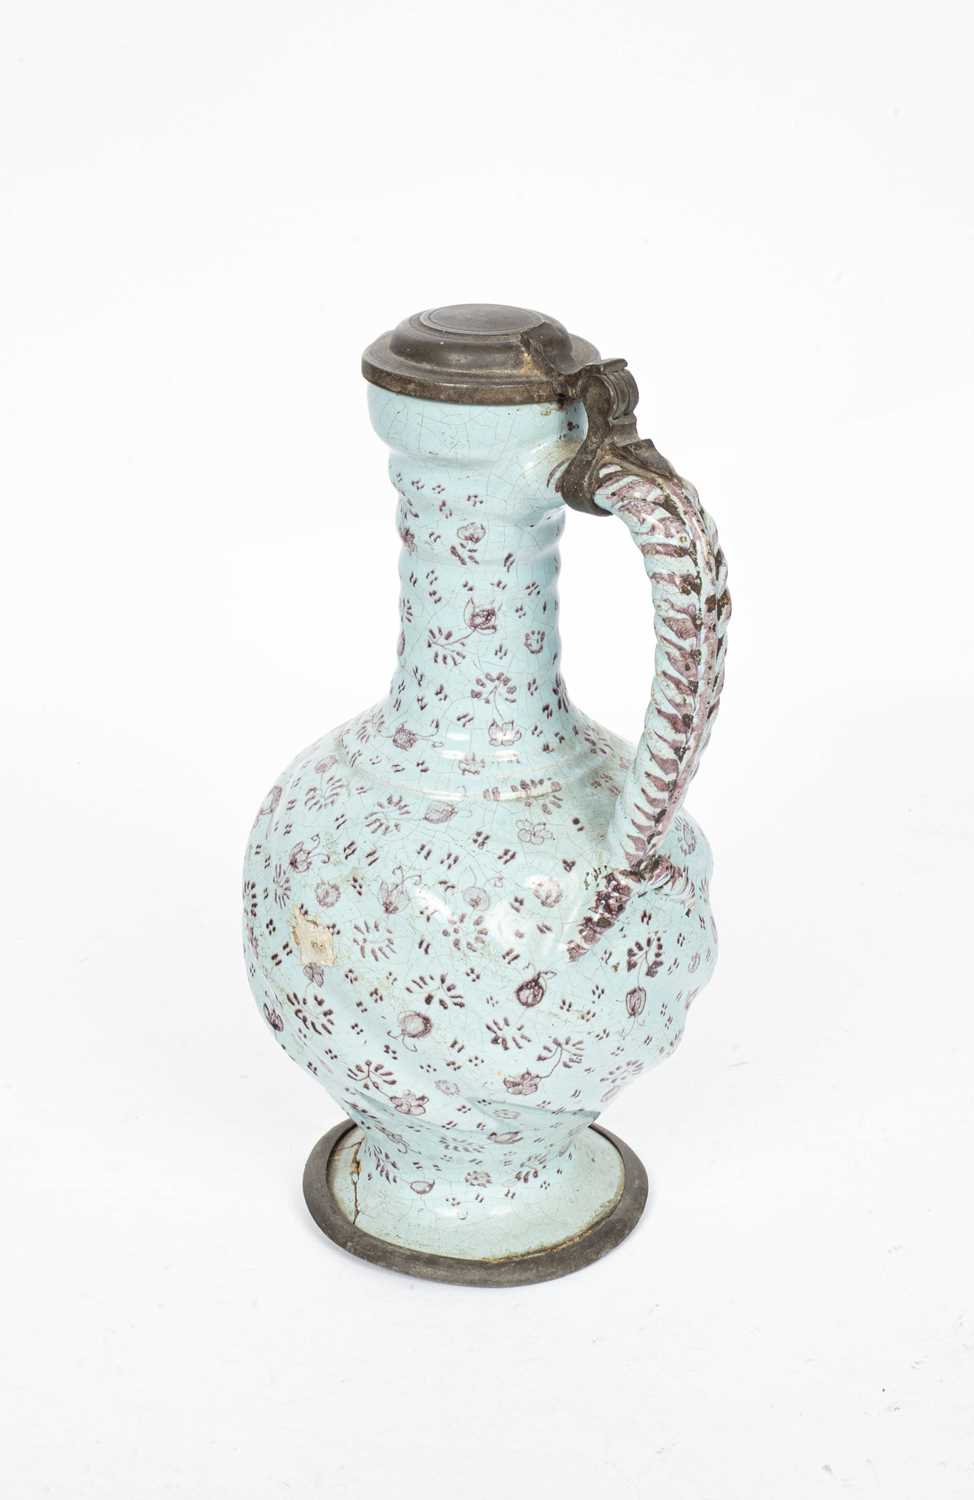 A German faience pewter-mounted jug - Image 2 of 4